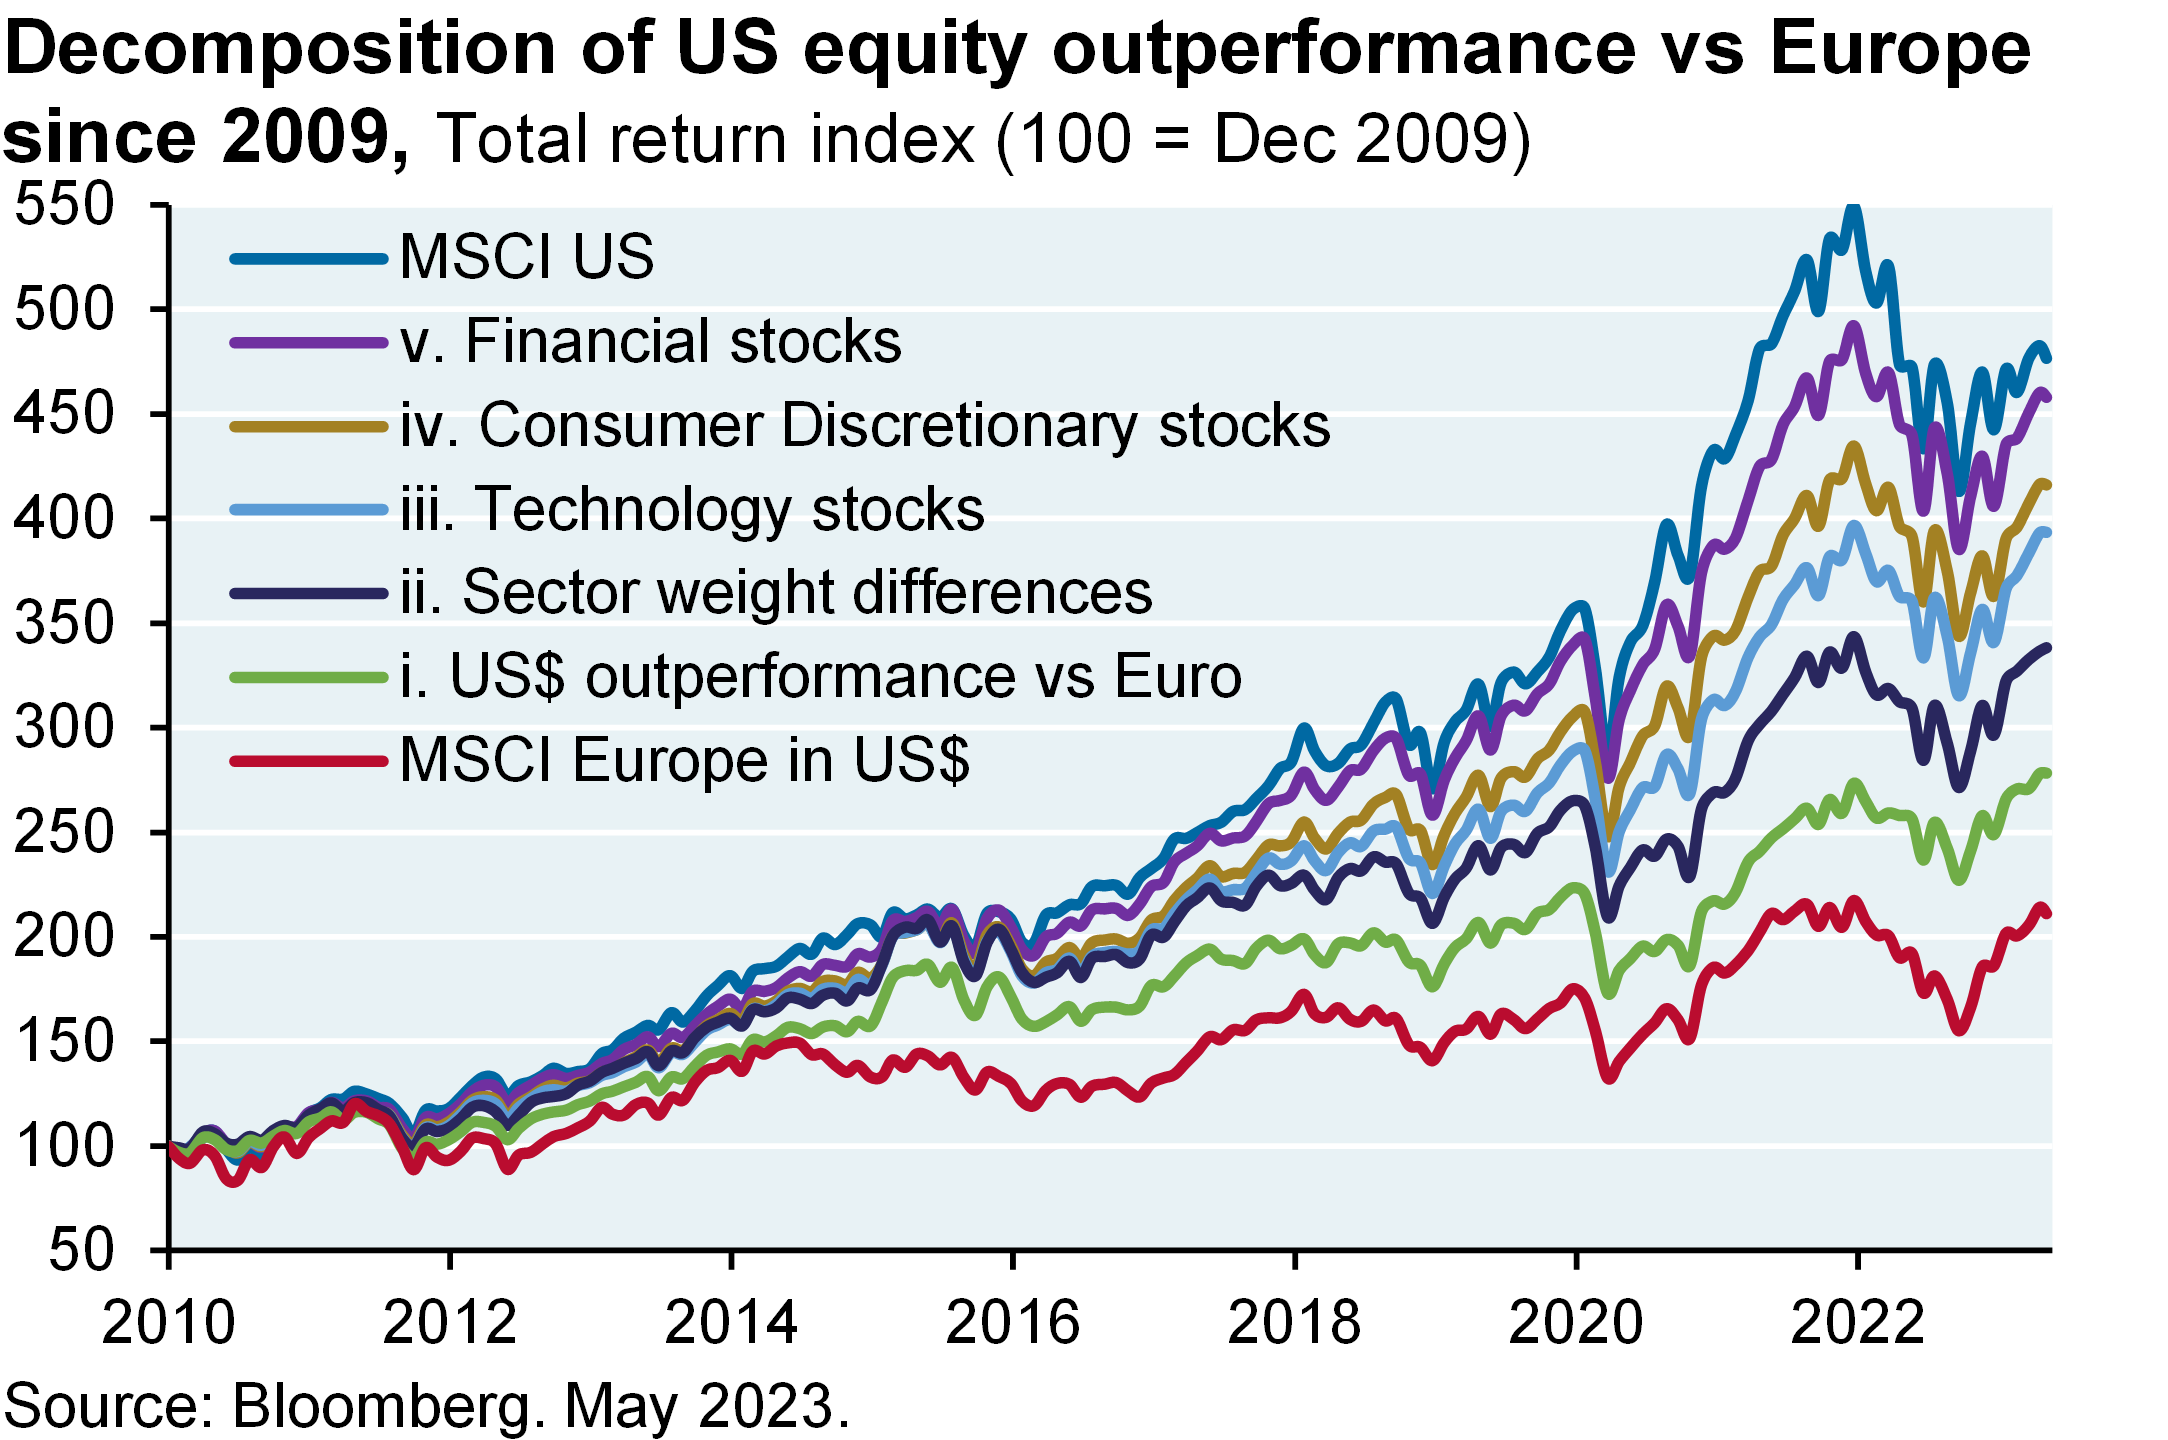 Line chart shows US vs Europe performance on a total return basis since Dec 2009. The chart attributes US outperformance to 5 factors: outperformance of the US$ vs Euro, benefit of US sector weights (i.e., US O/W to tech), and outperformance of US tech, consumer discretionary and financials vs their European counterparts. Each factor is layered on top of another to distinguish the attribution of each additional factor.